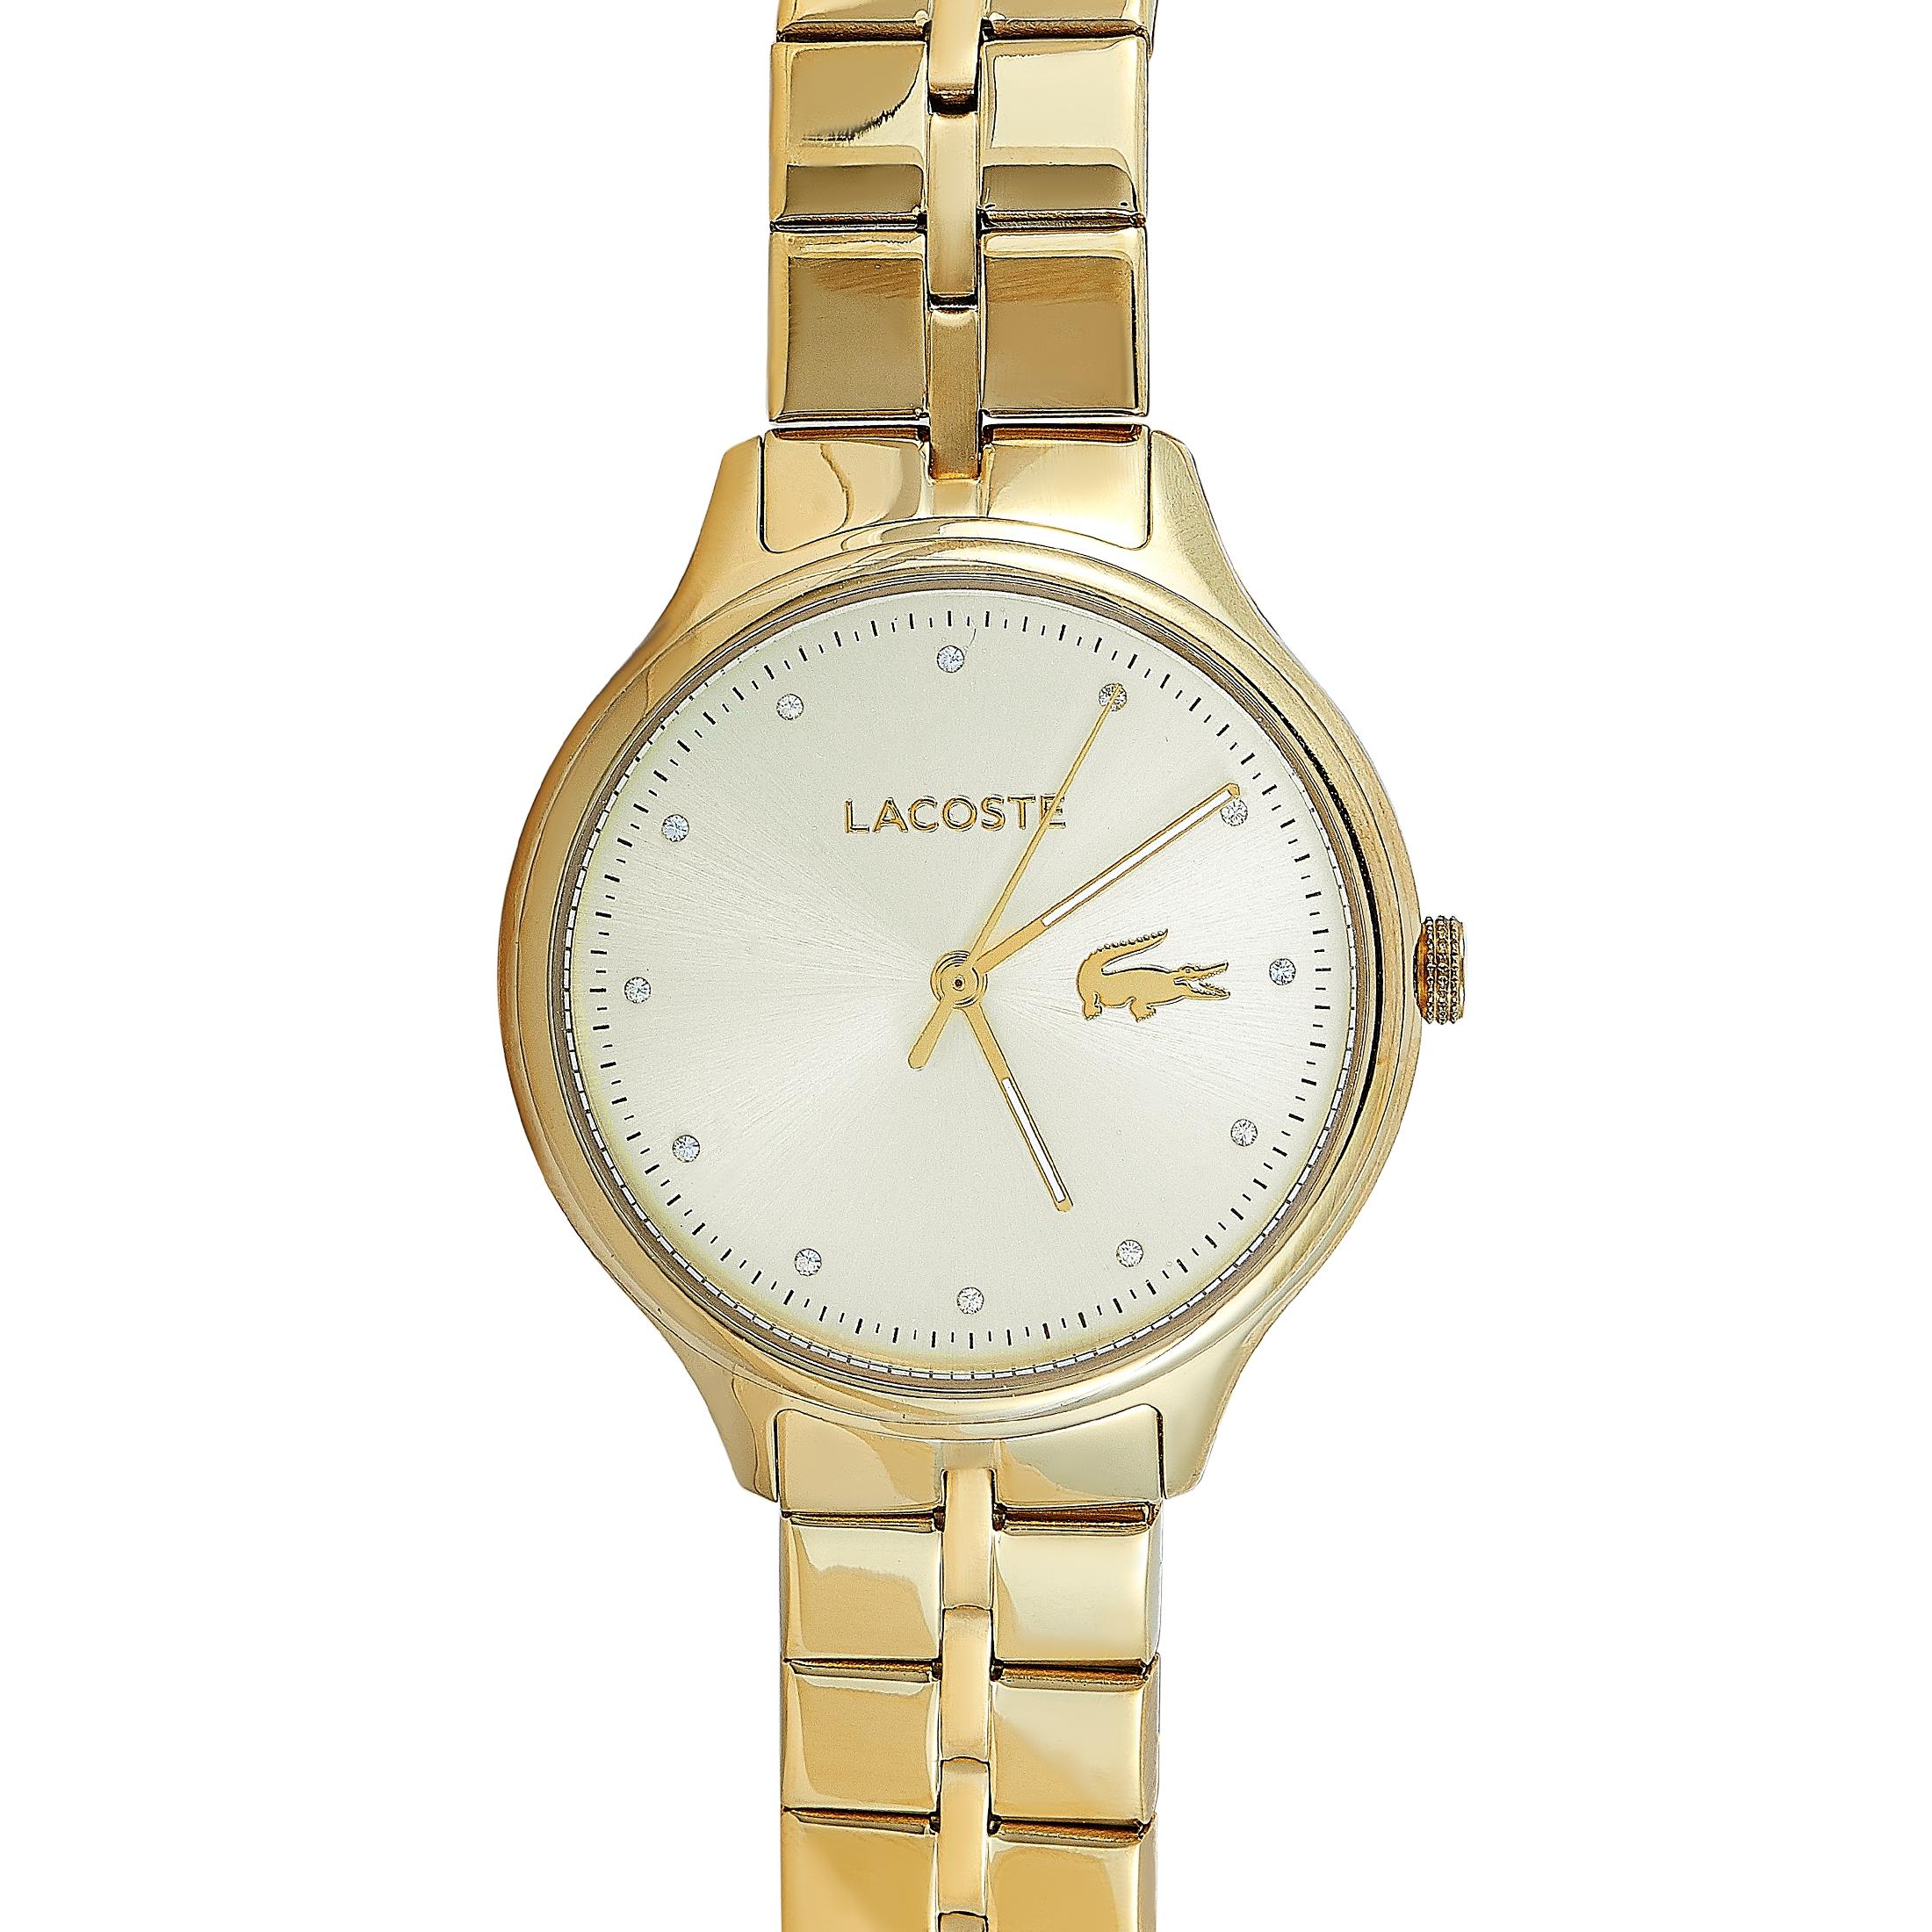 This is the Lacoste Constance watch, reference number 2001008.
 
 It is presented with a gold-tone stainless steel case that measures 38 mm in diameter. The case is water-resistant to 30 meters and mounted onto a matching gold-tone stainless steel